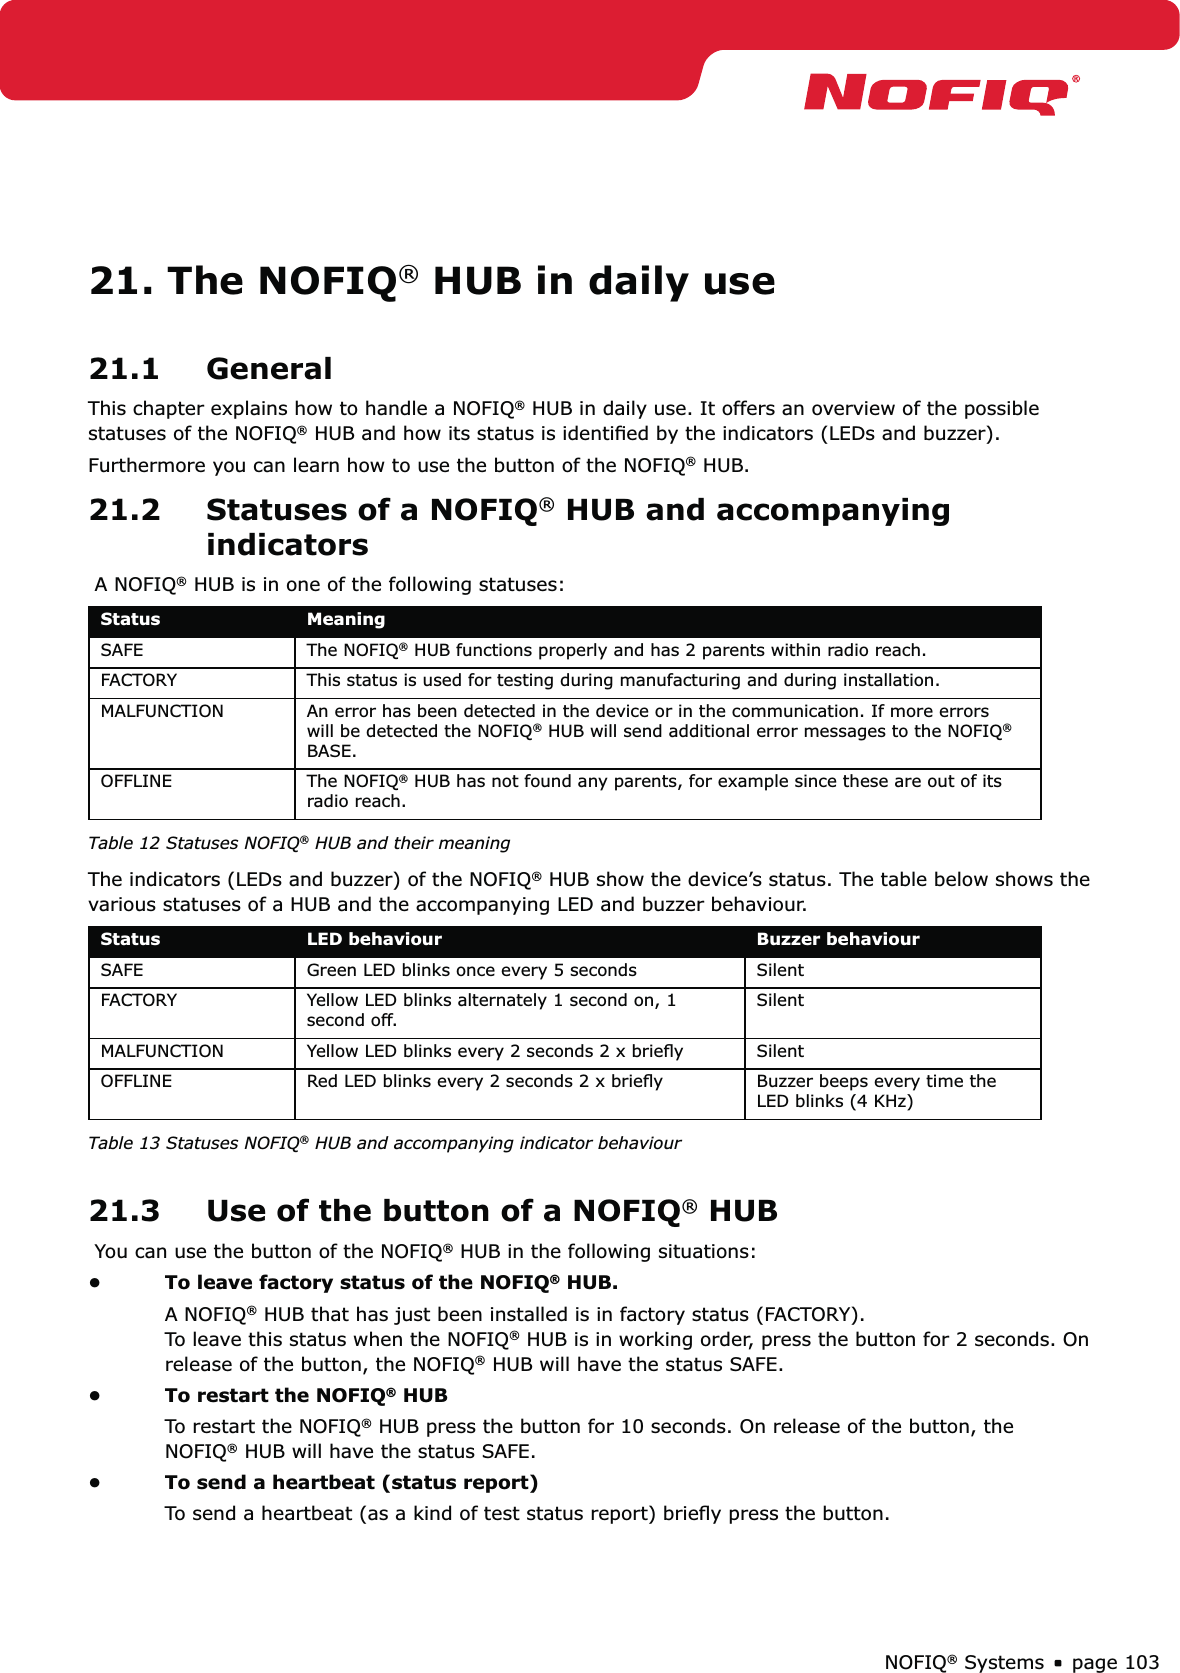 page 103NOFIQ® Systems21. The NOFIQ® HUB in daily use21.1 GeneralThis chapter explains how to handle a NOFIQ® HUB in daily use. It offers an overview of the possible statuses of the NOFIQ® HUB and how its status is identiﬁed by the indicators (LEDs and buzzer).Furthermore you can learn how to use the button of the NOFIQ® HUB.21.2  Statuses of a NOFIQ® HUB and accompanying indicators A NOFIQ® HUB is in one of the following statuses:Status MeaningSAFE The NOFIQ® HUB functions properly and has 2 parents within radio reach.FACTORY This status is used for testing during manufacturing and during installation.MALFUNCTION An error has been detected in the device or in the communication. If more errors will be detected the NOFIQ® HUB will send additional error messages to the NOFIQ® BASE.OFFLINE The NOFIQ® HUB has not found any parents, for example since these are out of its radio reach.  Table 12 Statuses NOFIQ® HUB and their meaning The indicators (LEDs and buzzer) of the NOFIQ® HUB show the device’s status. The table below shows the various statuses of a HUB and the accompanying LED and buzzer behaviour. Status LED behaviour Buzzer behaviourSAFE Green LED blinks once every 5 seconds SilentFACTORY Yellow LED blinks alternately 1 second on, 1 second off.SilentMALFUNCTION Yellow LED blinks every 2 seconds 2 x brieﬂy SilentOFFLINE Red LED blinks every 2 seconds 2 x brieﬂy Buzzer beeps every time the LED blinks (4 KHz)Table 13 Statuses NOFIQ® HUB and accompanying indicator behaviour21.3  Use of the button of a NOFIQ® HUB You can use the button of the NOFIQ® HUB in the following situations:To leave factory status of the NOFIQ•  ® HUB.A NOFIQ® HUB that has just been installed is in factory status (FACTORY).  To leave this status when the NOFIQ® HUB is in working order, press the button for 2 seconds. On release of the button, the NOFIQ® HUB will have the status SAFE. To restart the NOFIQ•  ® HUBTo restart the NOFIQ® HUB press the button for 10 seconds. On release of the button, the NOFIQ® HUB will have the status SAFE.To send a heartbeat (status report)• To send a heartbeat (as a kind of test status report) brieﬂy press the button.